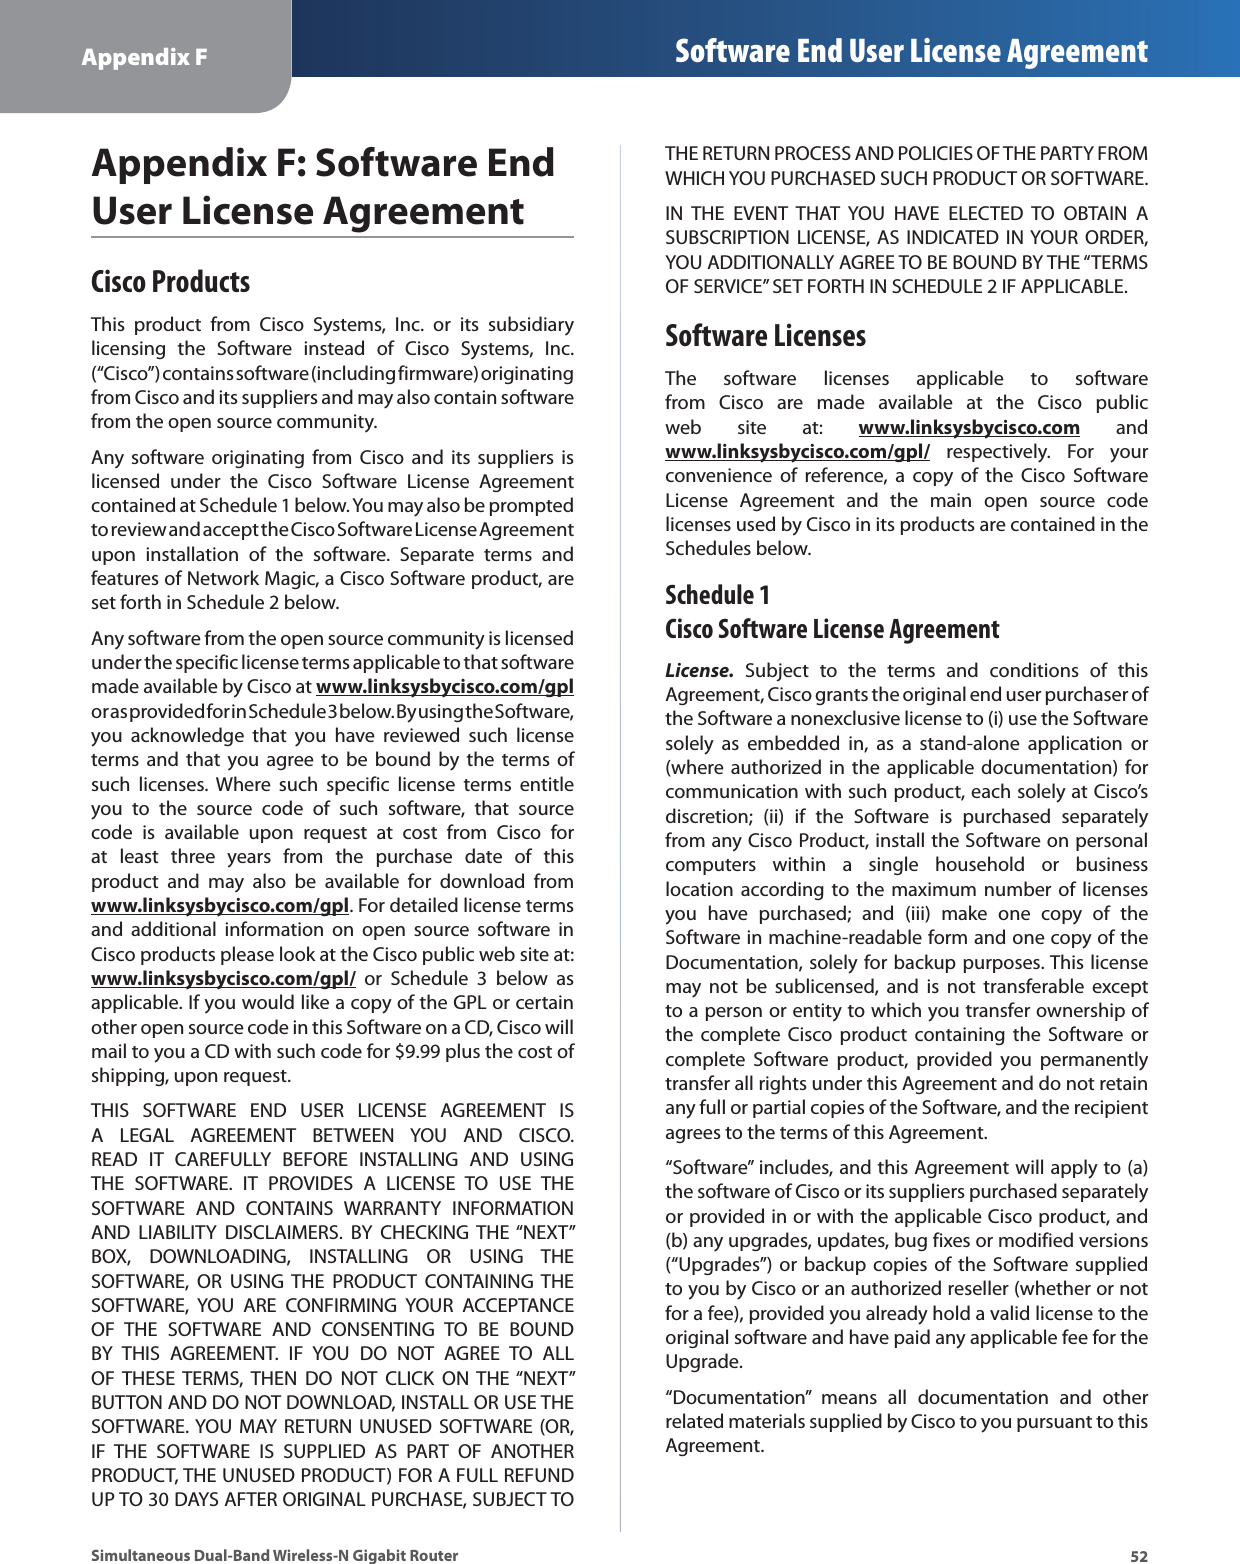 52Appendix F Software End User License AgreementSimultaneous Dual-Band Wireless-N Gigabit RouterAppendix F: Software End User License AgreementCisco ProductsThis product from Cisco Systems, Inc. or its subsidiary licensing the Software instead of Cisco Systems, Inc. (“Cisco”) contains software (including firmware) originating from Cisco and its suppliers and may also contain software from the open source community. Any software originating from Cisco and its suppliers is licensed under the Cisco Software License Agreement contained at Schedule 1 below. You may also be prompted to review and accept the Cisco Software License Agreement upon installation of the software. Separate terms and features of Network Magic, a Cisco Software product, are set forth in Schedule 2 below. Any software from the open source community is licensed under the specific license terms applicable to that software made available by Cisco at www.linksysbycisco.com/gpl or as provided for in Schedule 3 below. By using the Software, you acknowledge that you have reviewed such license terms and that you agree to be bound by the terms of such licenses. Where such specific license terms entitle you to the source code of such software, that source code is available upon request at cost from Cisco for at least three years from the purchase date of this product and may also be available for download from www.linksysbycisco.com/gpl. For detailed license terms and additional information on open source software in Cisco products please look at the Cisco public web site at: www.linksysbycisco.com/gpl/ or Schedule 3 below as applicable. If you would like a copy of the GPL or certain other open source code in this Software on a CD, Cisco will mail to you a CD with such code for $9.99 plus the cost of shipping, upon request.THIS SOFTWARE END USER LICENSE AGREEMENT IS A LEGAL AGREEMENT BETWEEN YOU AND CISCO. READ IT CAREFULLY BEFORE INSTALLING AND USING THE SOFTWARE. IT PROVIDES A LICENSE TO USE THE SOFTWARE AND CONTAINS WARRANTY INFORMATION AND LIABILITY DISCLAIMERS. BY CHECKING THE “NEXT” BOX, DOWNLOADING, INSTALLING OR USING THE SOFTWARE, OR USING THE PRODUCT CONTAINING THE SOFTWARE, YOU ARE CONFIRMING YOUR ACCEPTANCE OF THE SOFTWARE AND CONSENTING TO BE BOUND BY THIS AGREEMENT. IF YOU DO NOT AGREE TO ALL OF THESE TERMS, THEN DO NOT CLICK ON THE “NEXT” BUTTON AND DO NOT DOWNLOAD, INSTALL OR USE THE SOFTWARE. YOU MAY RETURN UNUSED SOFTWARE (OR, IF THE SOFTWARE IS SUPPLIED AS PART OF ANOTHER PRODUCT, THE UNUSED PRODUCT) FOR A FULL REFUND UP TO 30 DAYS AFTER ORIGINAL PURCHASE, SUBJECT TO THE RETURN PROCESS AND POLICIES OF THE PARTY FROM WHICH YOU PURCHASED SUCH PRODUCT OR SOFTWARE.IN THE EVENT THAT YOU HAVE ELECTED TO OBTAIN A SUBSCRIPTION LICENSE, AS INDICATED IN YOUR ORDER, YOU ADDITIONALLY AGREE TO BE BOUND BY THE “TERMS OF SERVICE” SET FORTH IN SCHEDULE 2 IF APPLICABLE.Software LicensesThe software licenses applicable to software from Cisco are made available at the Cisco public web site at: www.linksysbycisco.com and www.linksysbycisco.com/gpl/ respectively. For your convenience of reference, a copy of the Cisco Software License Agreement and the main open source code licenses used by Cisco in its products are contained in the Schedules below.Schedule 1 Cisco Software License AgreementLicense. Subject to the terms and conditions of this Agreement, Cisco grants the original end user purchaser of the Software a nonexclusive license to (i) use the Software solely as embedded in, as a stand-alone application or (where authorized in the applicable documentation) for communication with such product, each solely at Cisco’s discretion; (ii) if the Software is purchased separately from any Cisco Product, install the Software on personal computers within a single household or business location according to the maximum number of licenses you have purchased; and (iii) make one copy of the Software in machine-readable form and one copy of the Documentation, solely for backup purposes. This license may not be sublicensed, and is not transferable except to a person or entity to which you transfer ownership of the complete Cisco product containing the Software or complete Software product, provided you permanently transfer all rights under this Agreement and do not retain any full or partial copies of the Software, and the recipient agrees to the terms of this Agreement. “Software” includes, and this Agreement will apply to (a) the software of Cisco or its suppliers purchased separately or provided in or with the applicable Cisco product, and (b) any upgrades, updates, bug fixes or modified versions (“Upgrades”) or backup copies of the Software supplied to you by Cisco or an authorized reseller (whether or not for a fee), provided you already hold a valid license to the original software and have paid any applicable fee for the Upgrade. “Documentation” means all documentation and other related materials supplied by Cisco to you pursuant to this Agreement.